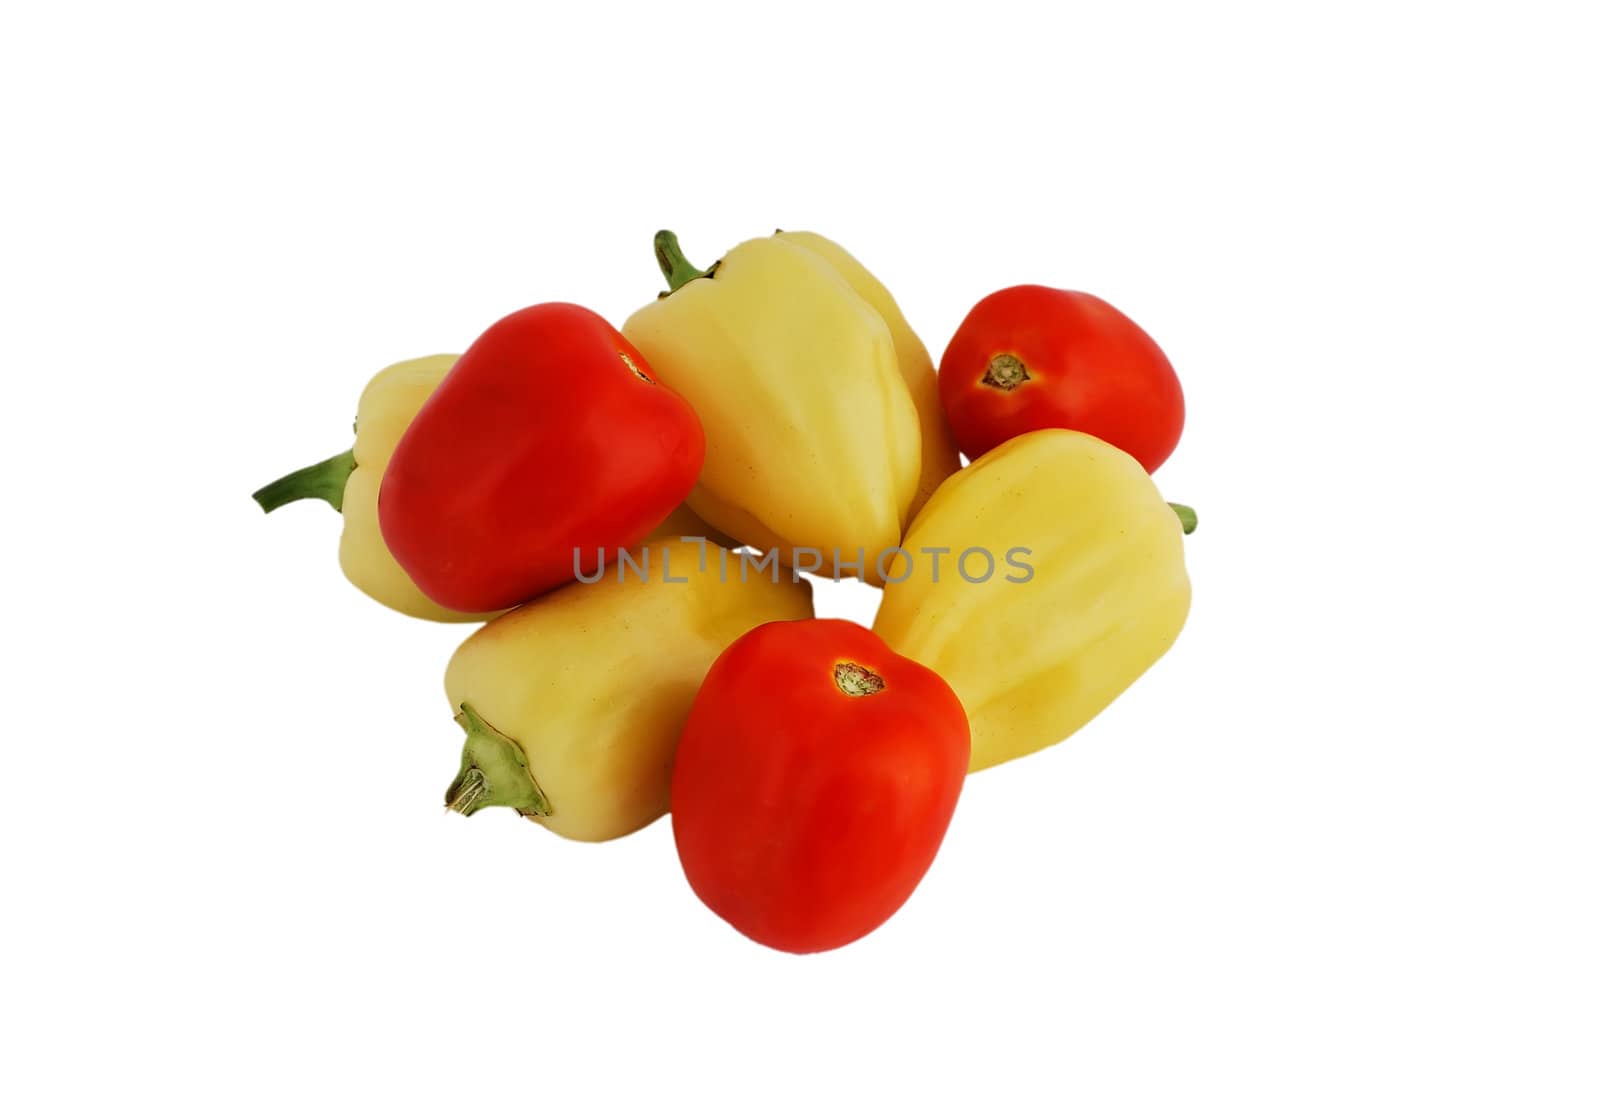 vegetables: tomatoes and peppers on a white background